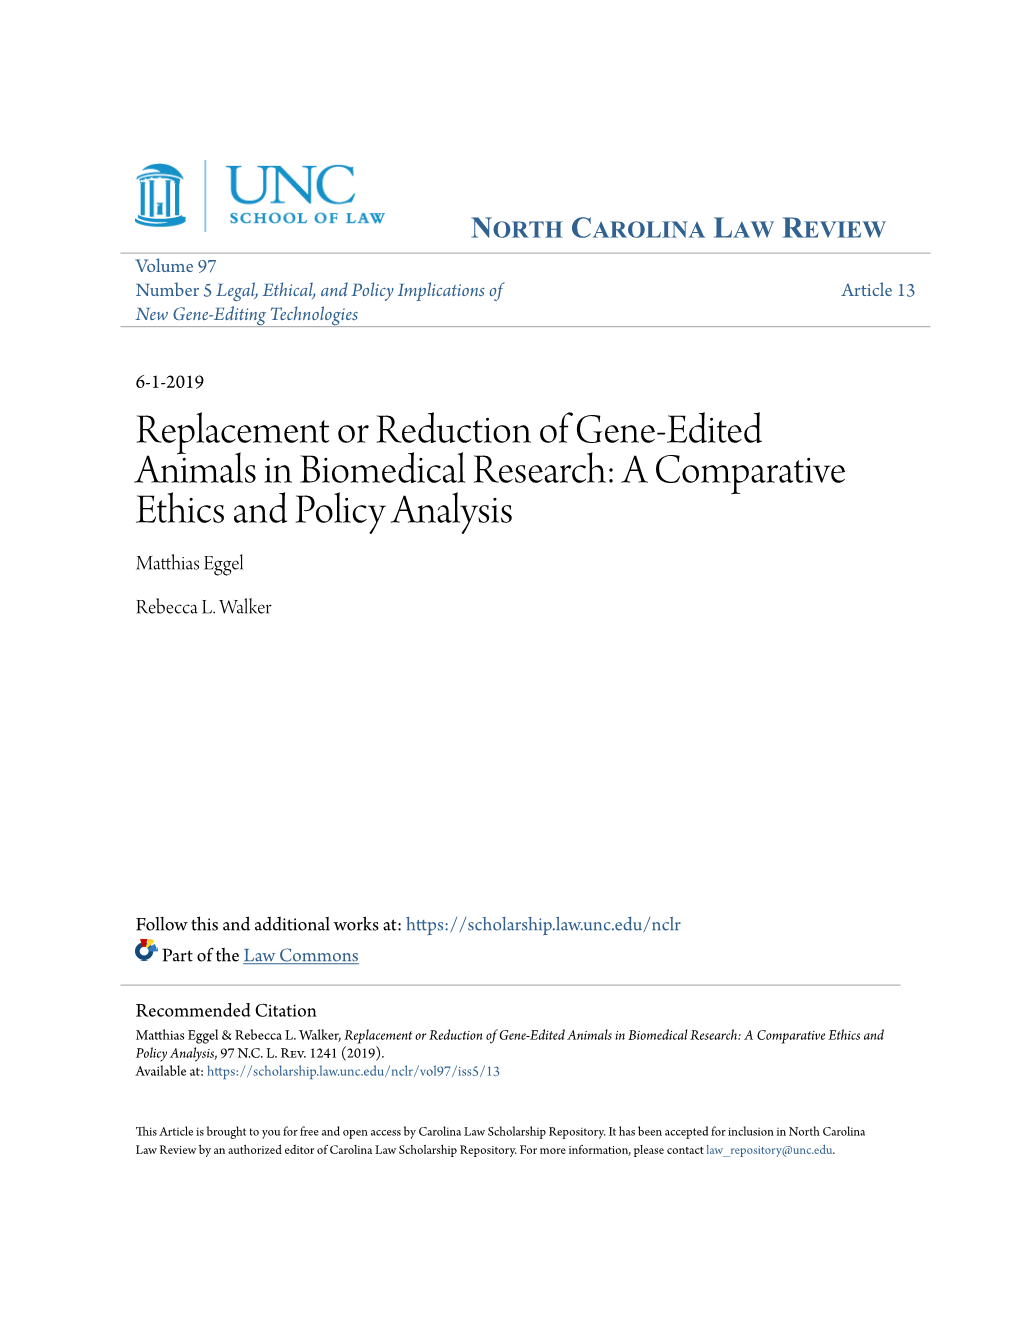 Replacement Or Reduction of Gene-Edited Animals in Biomedical Research: a Comparative Ethics and Policy Analysis Matthias Eggel